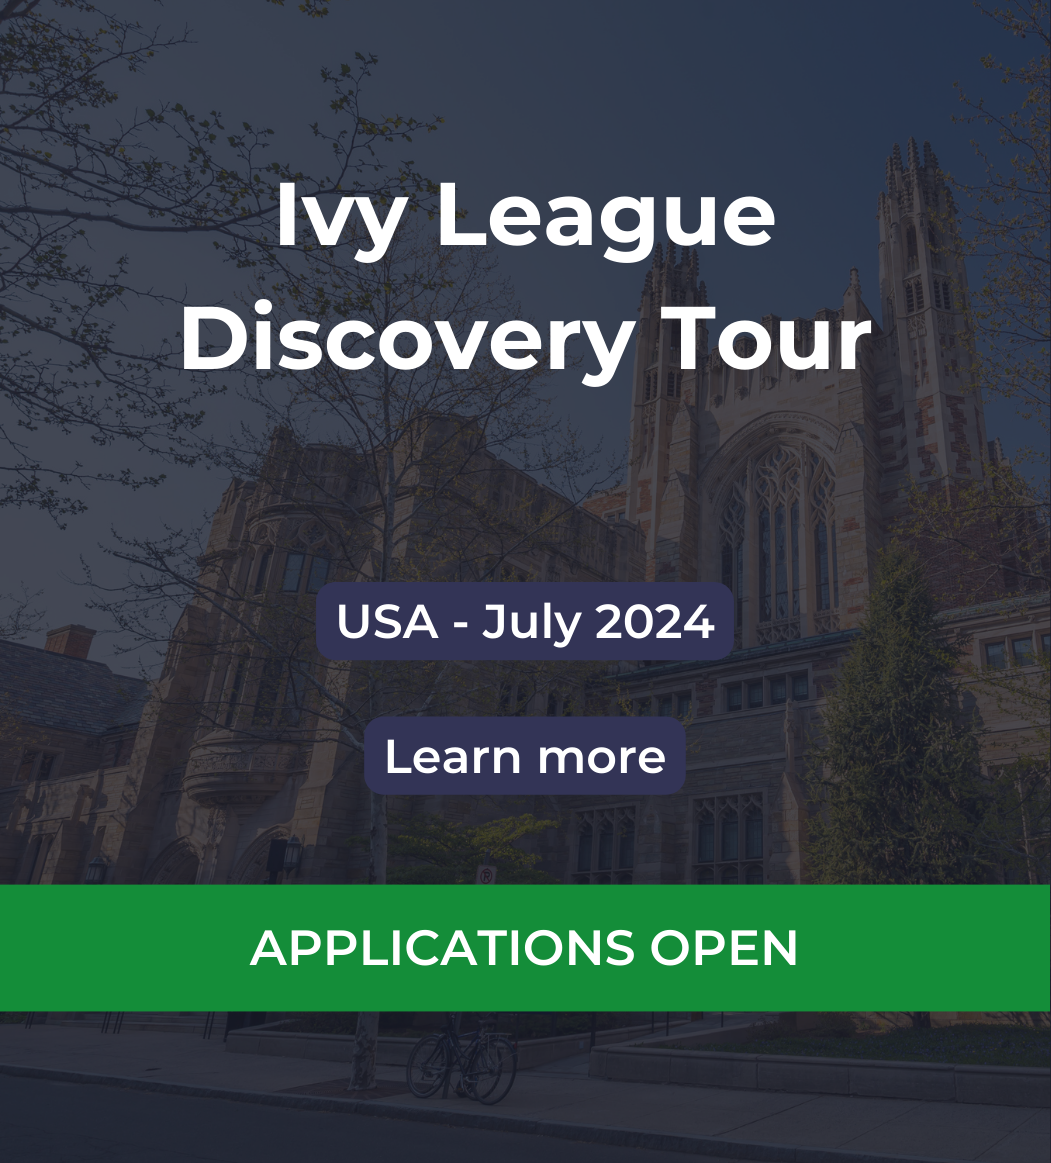 Ivy League Discovery Tour